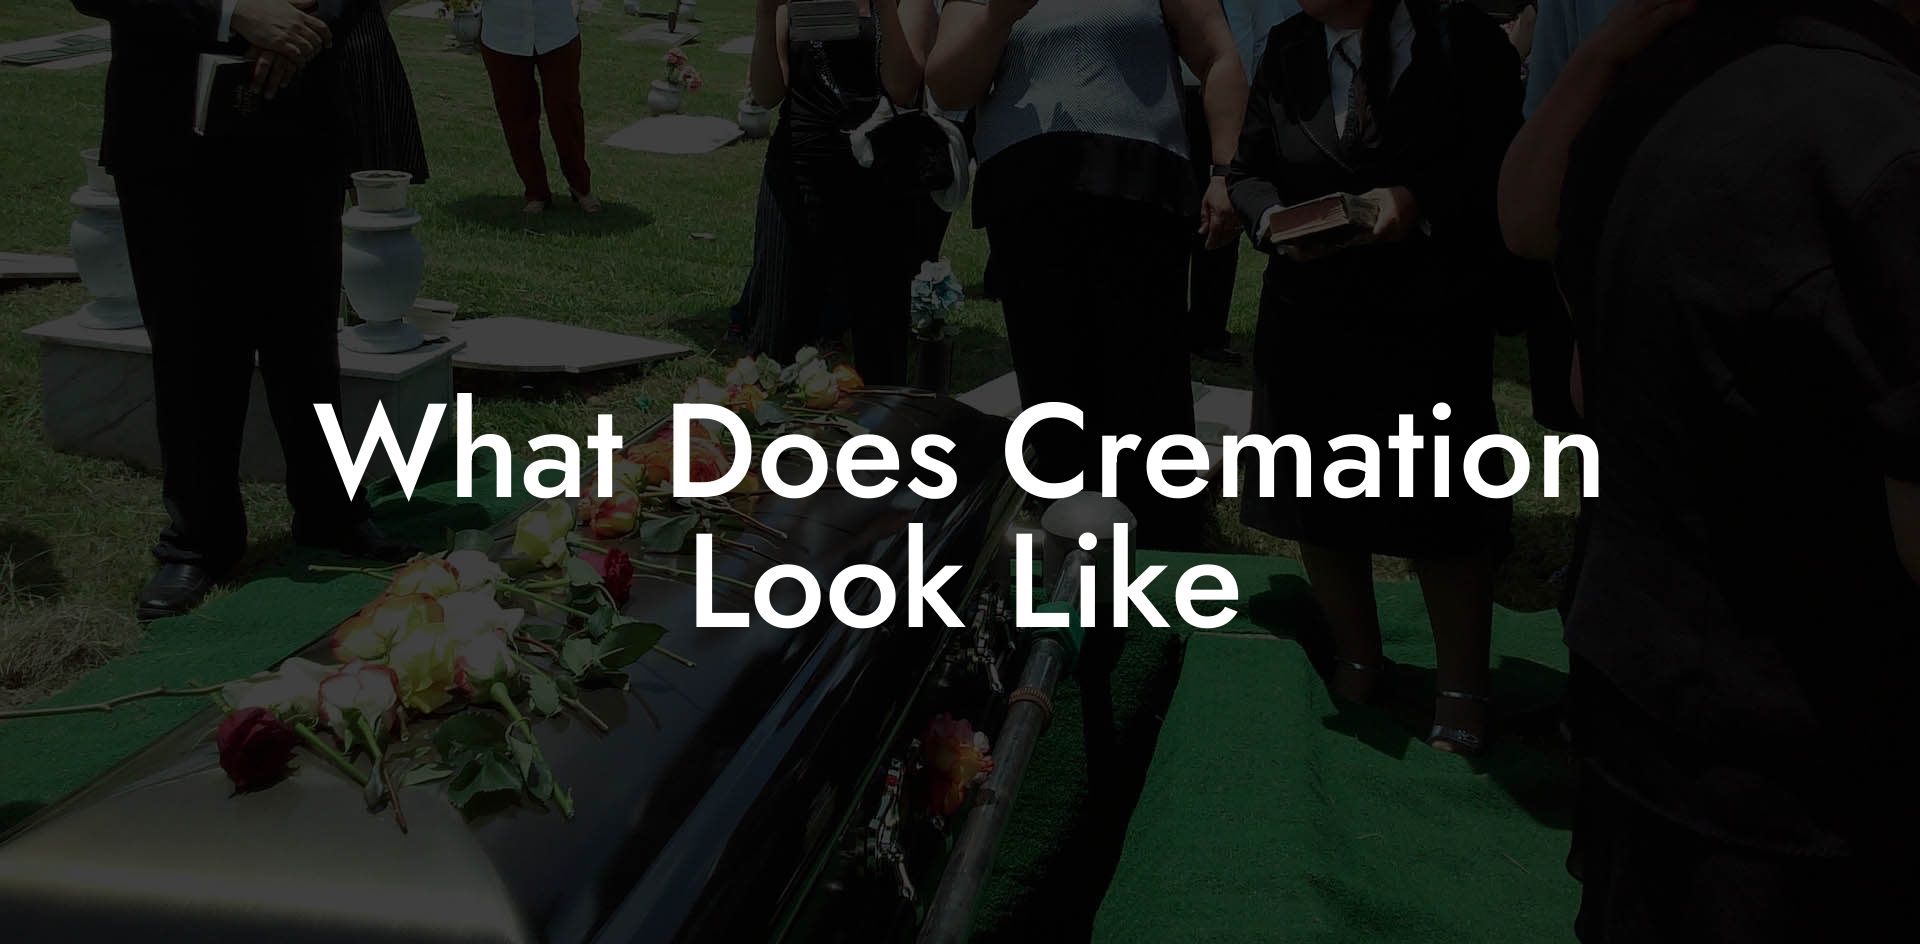 What Does Cremation Look Like